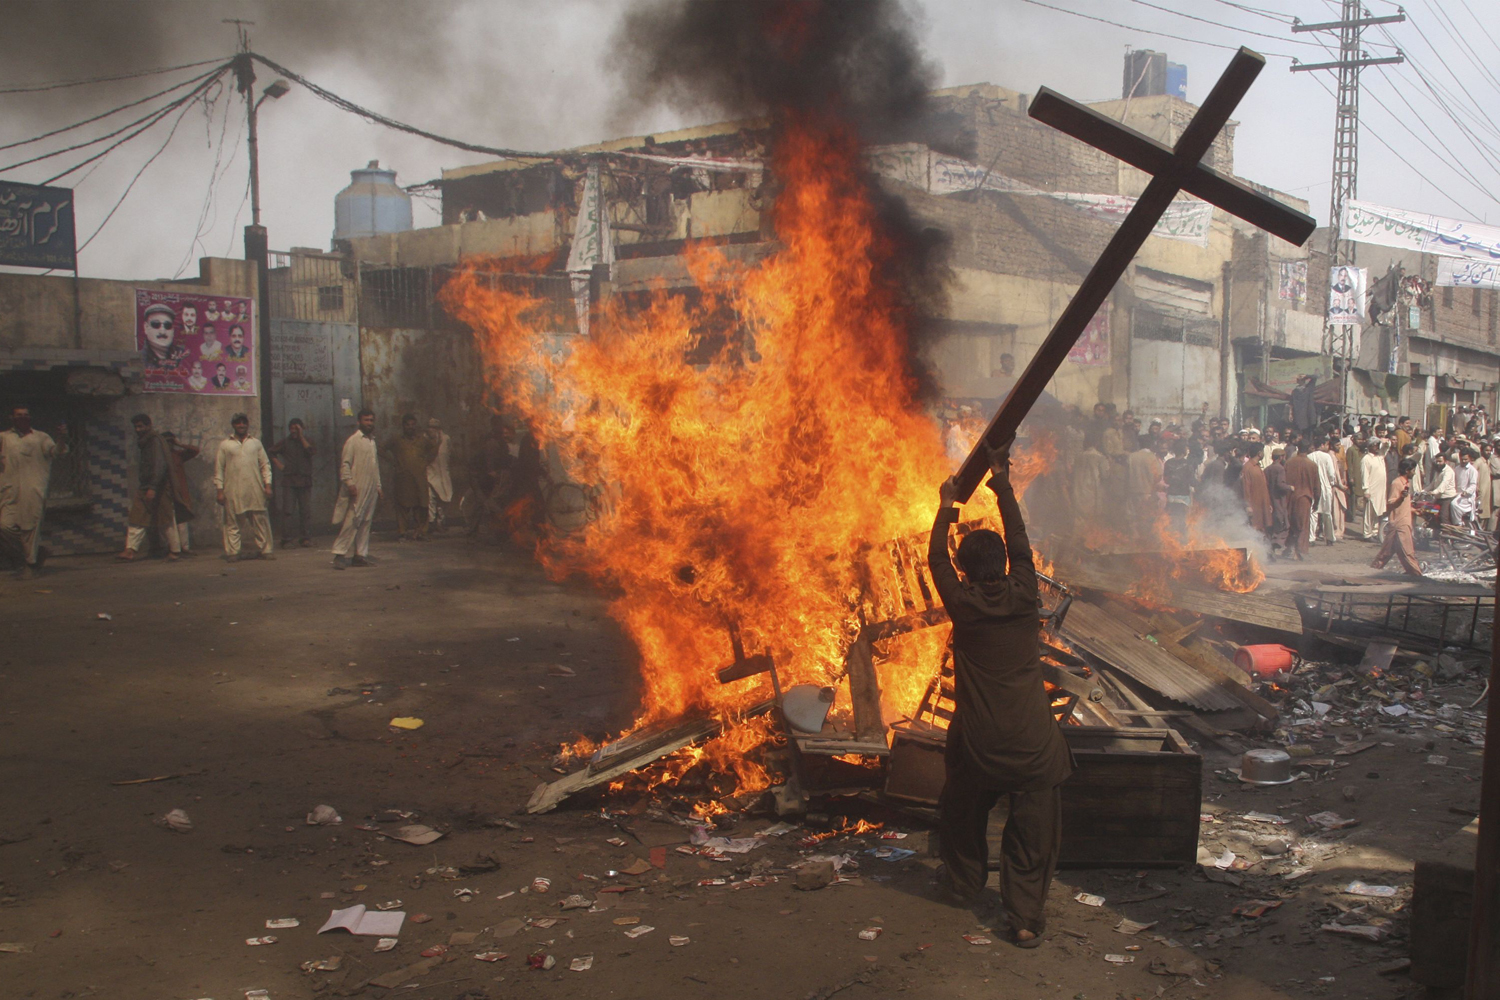 A demonstrator burns a cross during a protest in the Badami Bagh area of Lahore